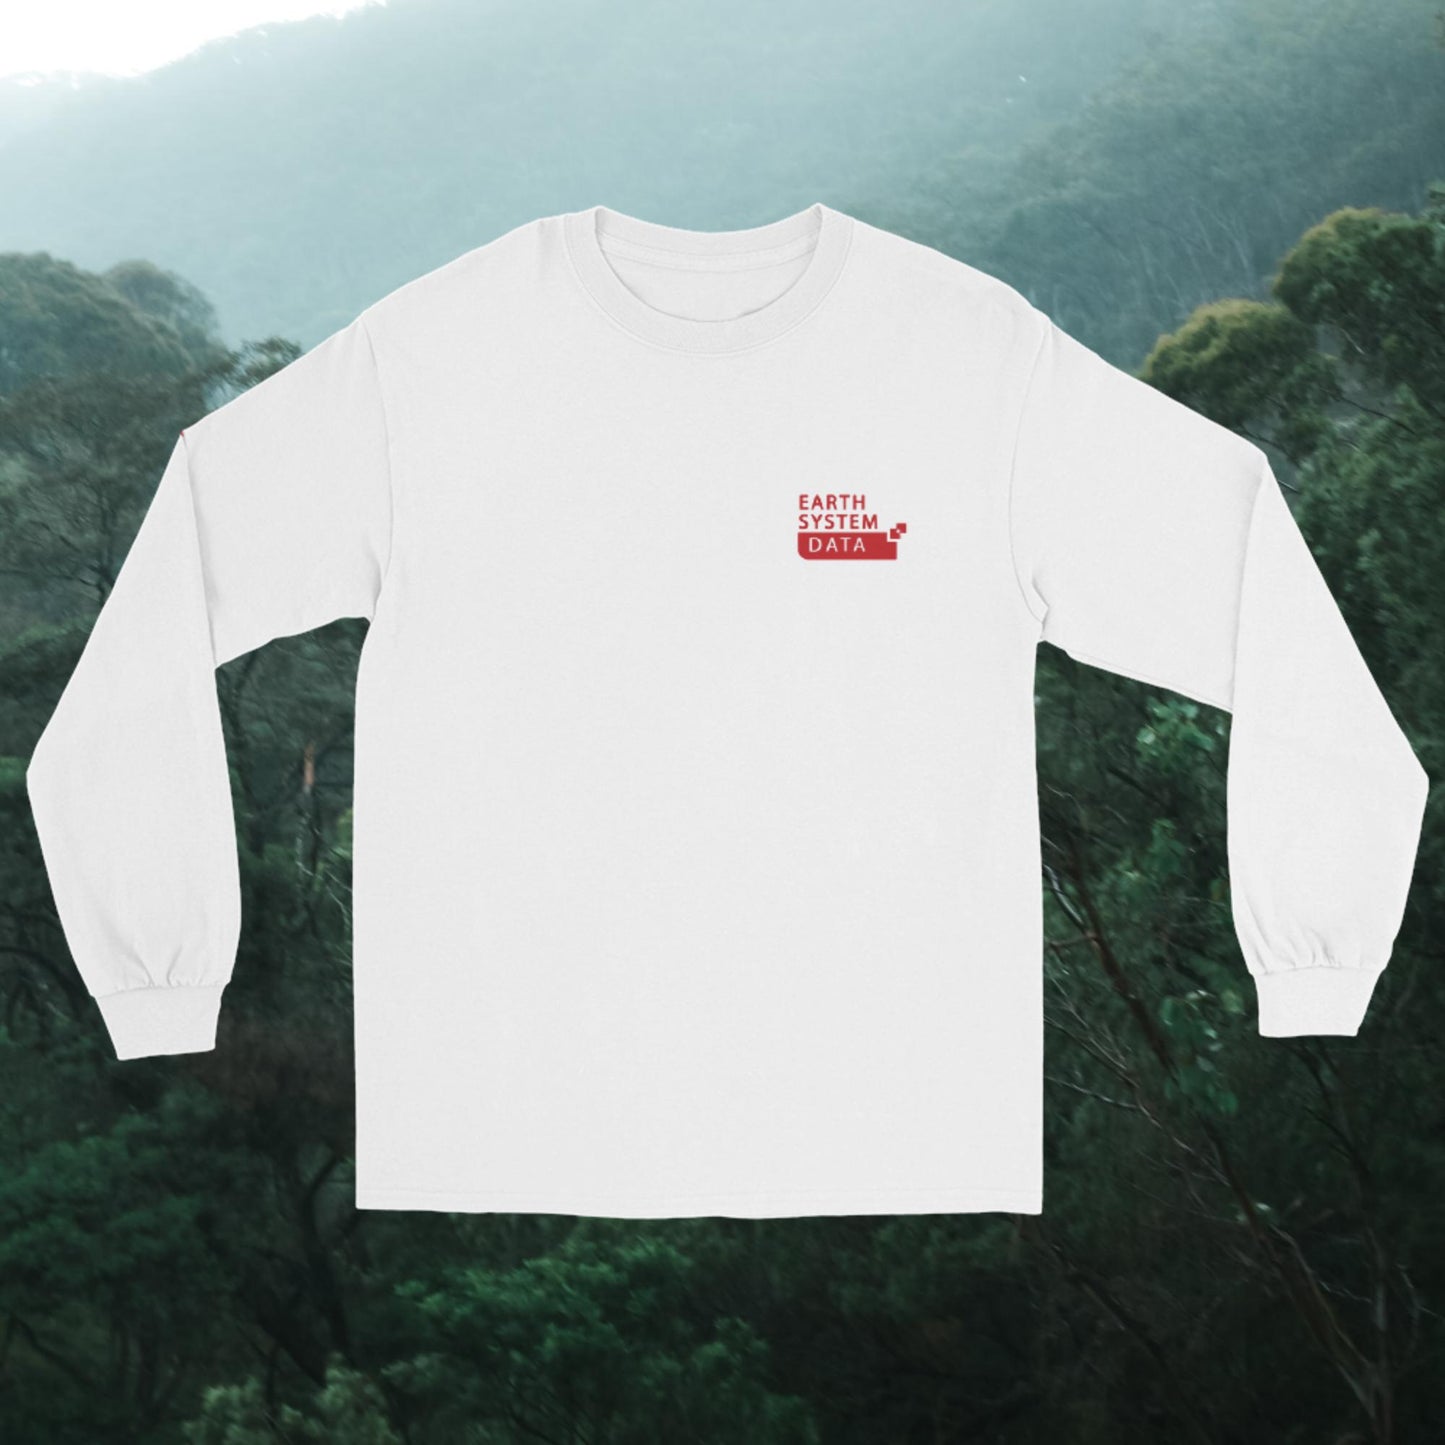 Coding for Code Red LS Shirt